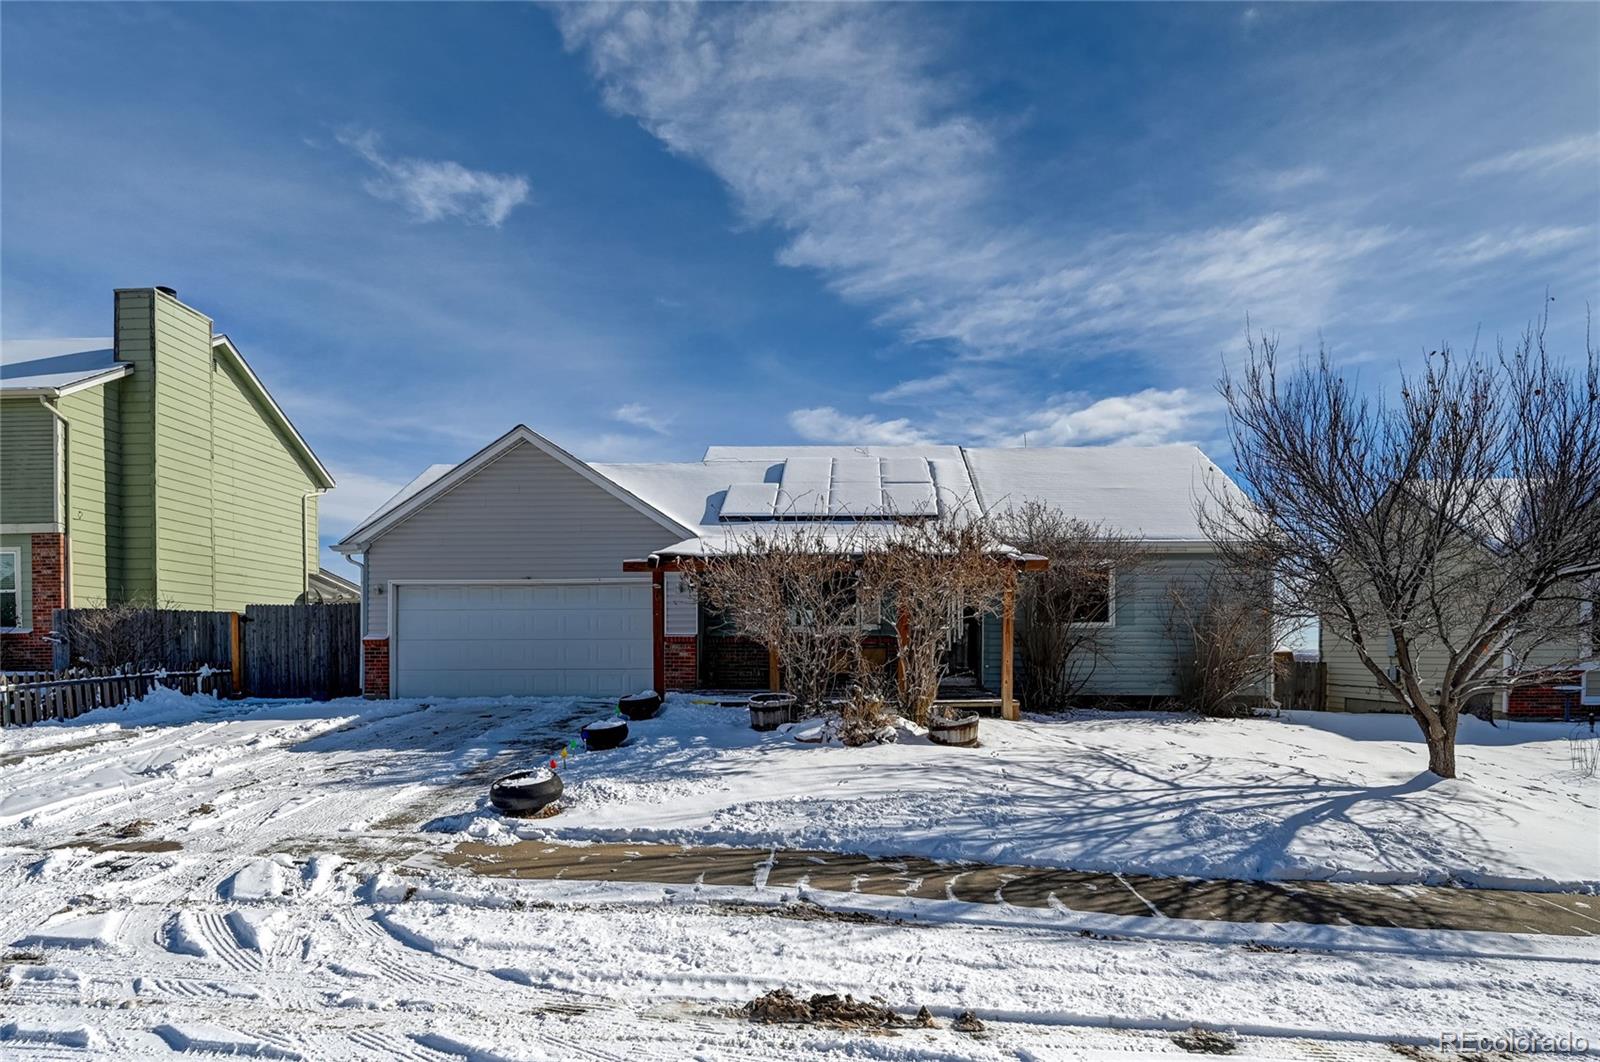 9820  harrison street, thornton sold home. Closed on 2024-02-23 for $440,000.